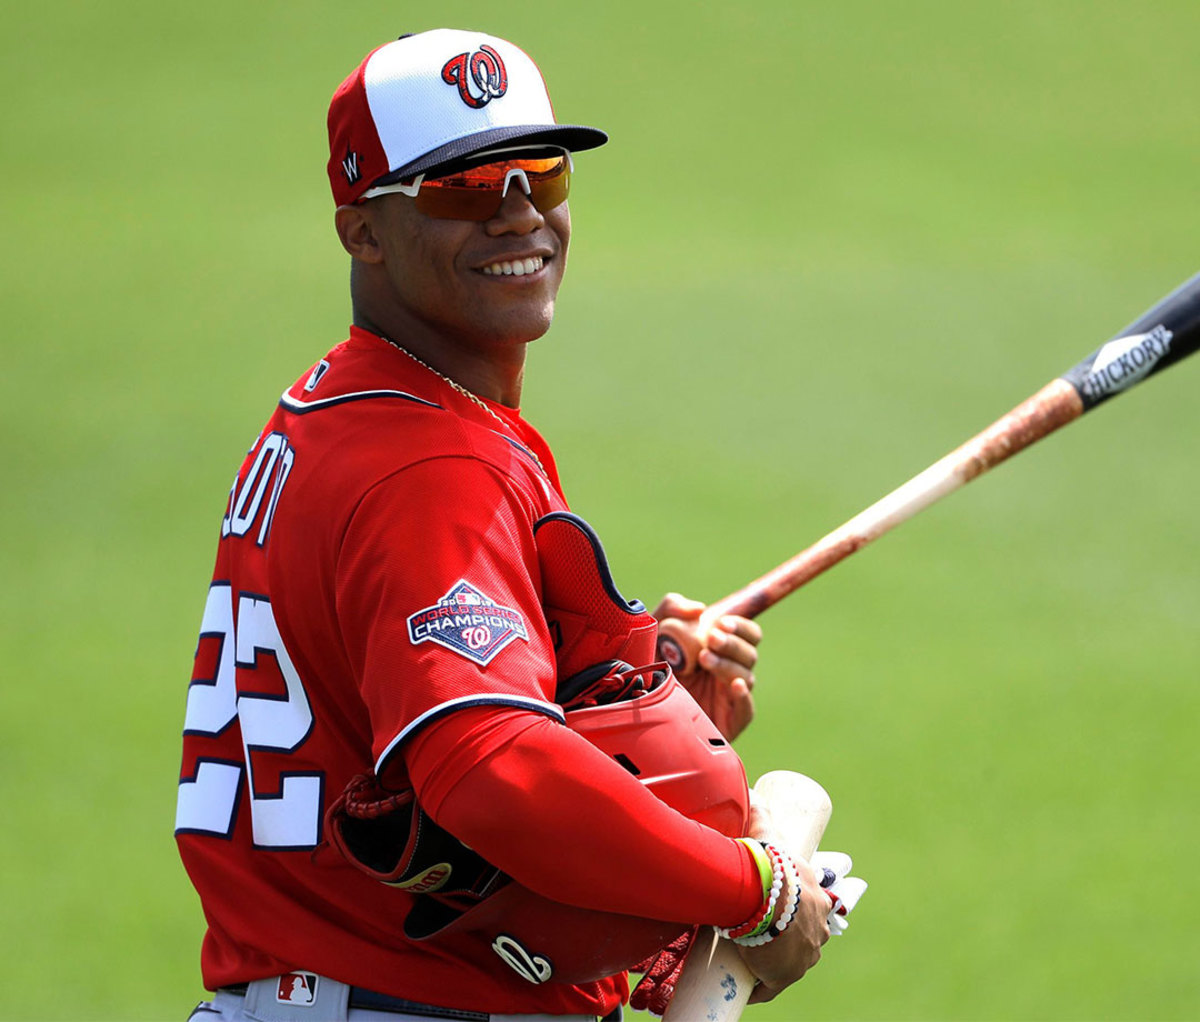 Washington Nationals left fielder Juan Soto reacts to comments by Miami Marlins players as he heads to the dugout prior to a spring training baseball game